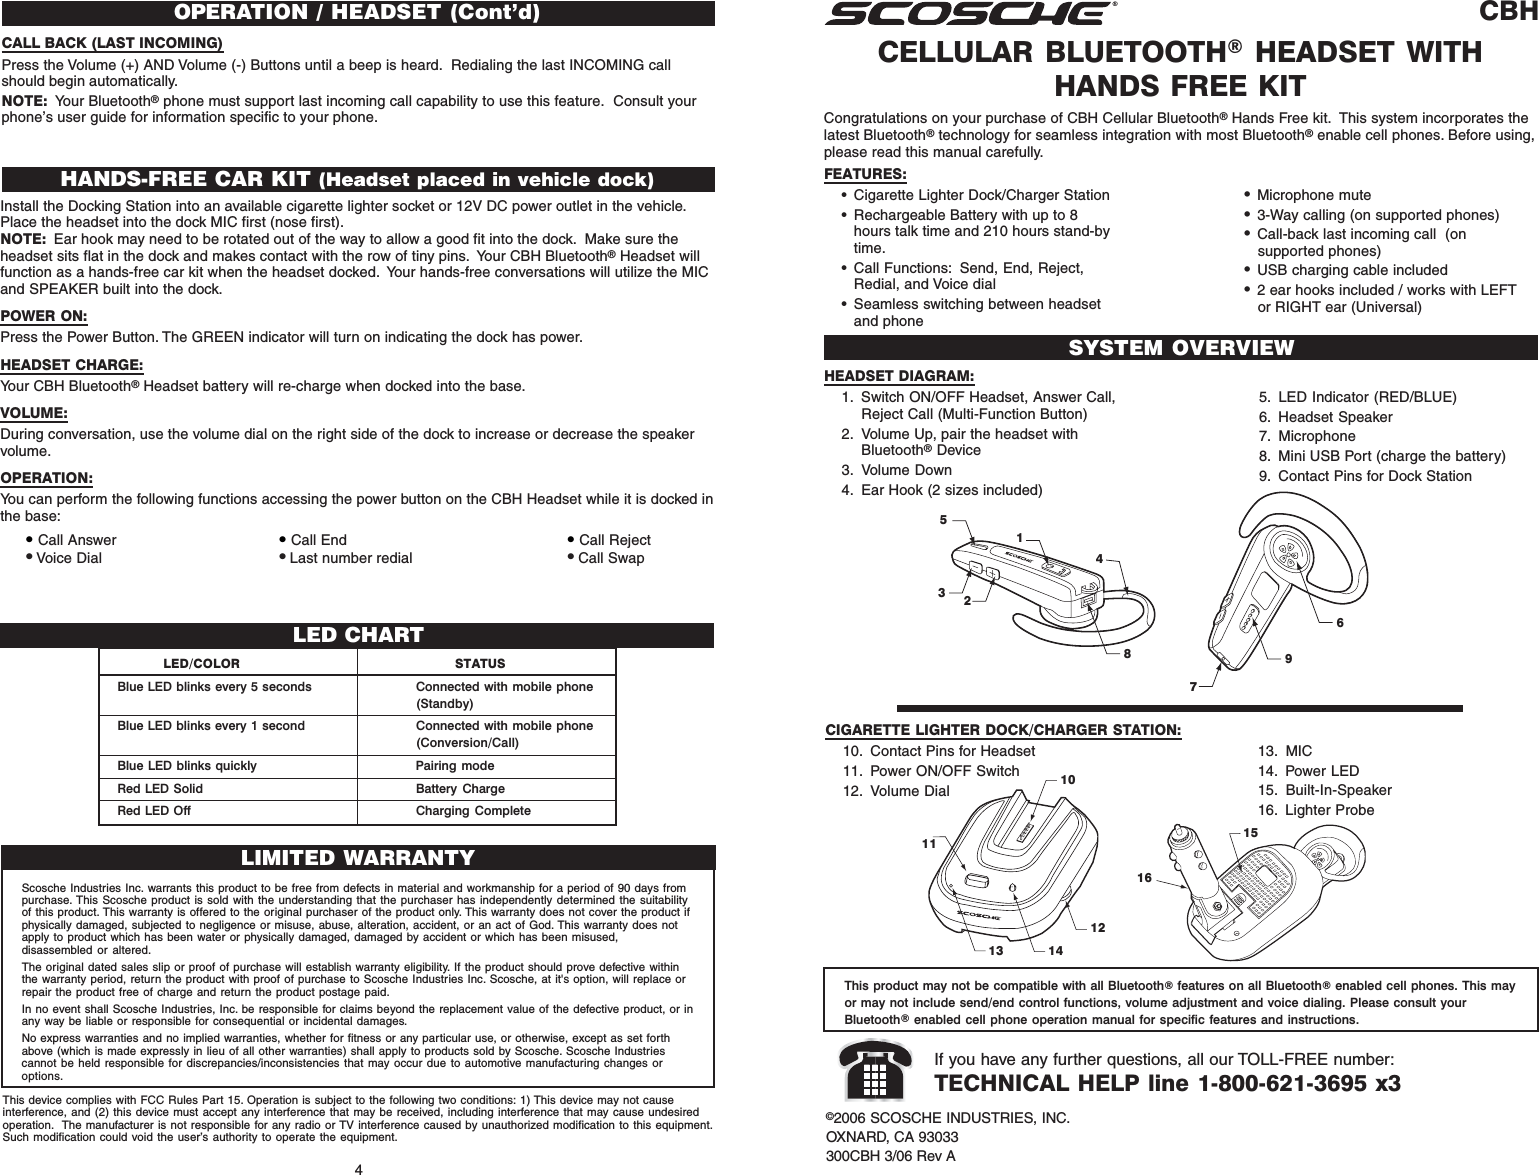 CBHCELLULAR BLUETOOTH® HEADSET WITHHANDS FREE KITSYSTEM OVERVIEW©2006 SCOSCHE INDUSTRIES, INC.OXNARD, CA 93033300CBH 3/06 Rev AIf you have any further questions, all our TOLL-FREE number:TECHNICAL HELP line 1-800-621-3695 x34Congratulations on your purchase of CBH Cellular Bluetooth® Hands Free kit.  This system incorporates thelatest Bluetooth® technology for seamless integration with most Bluetooth® enable cell phones. Before using,please read this manual carefully.FEATURES:• Cigarette Lighter Dock/Charger Station• Rechargeable Battery with up to 8hours talk time and 210 hours stand-bytime.• Call Functions: Send, End, Reject,Redial, and Voice dial• Seamless switching between headsetand phoneHEADSET DIAGRAM:1. Switch ON/OFF Headset, Answer Call,Reject Call (Multi-Function Button)2. Volume Up, pair the headset withBluetooth® Device3. Volume Down4. Ear Hook (2 sizes included)5143287965. LED Indicator (RED/BLUE)6. Headset Speaker7. Microphone8. Mini USB Port (charge the battery)9. Contact Pins for Dock StationHANDS-FREE CAR KIT (Headset placed in vehicle dock)Install the Docking Station into an available cigarette lighter socket or 12V DC power outlet in the vehicle.Place the headset into the dock MIC first (nose first).NOTE: Ear hook may need to be rotated out of the way to allow a good fit into the dock.  Make sure theheadset sits flat in the dock and makes contact with the row of tiny pins.  Your CBH Bluetooth® Headset willfunction as a hands-free car kit when the headset docked.  Your hands-free conversations will utilize the MICand SPEAKER built into the dock.POWER ON:Press the Power Button. The GREEN indicator will turn on indicating the dock has power.HEADSET CHARGE:Your CBH Bluetooth® Headset battery will re-charge when docked into the base.VOLUME:During conversation, use the volume dial on the right side of the dock to increase or decrease the speakervolume.OPERATION:You can perform the following functions accessing the power button on the CBH Headset while it is docked inthe base:• Call Answer • Call End • Call Reject• Voice Dial • Last number redial • Call SwapThis product may not be compatible with all Bluetooth® features on all Bluetooth® enabled cell phones. This mayor may not include send/end control functions, volume adjustment and voice dialing. Please consult yourBluetooth® enabled cell phone operation manual for specific features and instructions.•Microphone mute•3-Way calling (on supported phones)•Call-back last incoming call  (onsupported phones)•USB charging cable included•2 ear hooks included / works with LEFTor RIGHT ear (Universal)CIGARETTE LIGHTER DOCK/CHARGER STATION:10. Contact Pins for Headset11. Power ON/OFF Switch12. Volume Dial1113 141210151613. MIC14. Power LED15. Built-In-Speaker16. Lighter ProbeOPERATION / HEADSET (Cont&apos;d)CALL BACK (LAST INCOMING)Press the Volume (+) AND Volume (-) Buttons until a beep is heard.  Redialing the last INCOMING callshould begin automatically.NOTE: Your Bluetooth® phone must support last incoming call capability to use this feature.  Consult yourphone’s user guide for information specific to your phone.LED/COLOR STATUSBlue LED blinks every 5 seconds Connected with mobile phone(Standby)Blue LED blinks every 1 second Connected with mobile phone(Conversion/Call)Blue LED blinks quickly Pairing modeRed LED Solid Battery ChargeRed LED Off Charging CompleteLED CHARTLIMITED WARRANTYScosche Industries Inc. warrants this product to be free from defects in material and workmanship for a period of 90 days frompurchase. This Scosche product is sold with the understanding that the purchaser has independently determined the suitabilityof this product. This warranty is offered to the original purchaser of the product only. This warranty does not cover the product ifphysically damaged, subjected to negligence or misuse, abuse, alteration, accident, or an act of God. This warranty does notapply to product which has been water or physically damaged, damaged by accident or which has been misused,disassembled or altered.The original dated sales slip or proof of purchase will establish warranty eligibility. If the product should prove defective withinthe warranty period, return the product with proof of purchase to Scosche Industries Inc. Scosche, at it&apos;s option, will replace orrepair the product free of charge and return the product postage paid.In no event shall Scosche Industries, Inc. be responsible for claims beyond the replacement value of the defective product, or inany way be liable or responsible for consequential or incidental damages.No express warranties and no implied warranties, whether for fitness or any particular use, or otherwise, except as set forthabove (which is made expressly in lieu of all other warranties) shall apply to products sold by Scosche. Scosche Industriescannot be held responsible for discrepancies/inconsistencies that may occur due to automotive manufacturing changes oroptions.This device complies with FCC Rules Part 15. Operation is subject to the following two conditions: 1) This device may not causeinterference, and (2) this device must accept any interference that may be received, including interference that may cause undesiredoperation.  The manufacturer is not responsible for any radio or TV interference caused by unauthorized modification to this equipment.Such modification could void the user’s authority to operate the equipment.